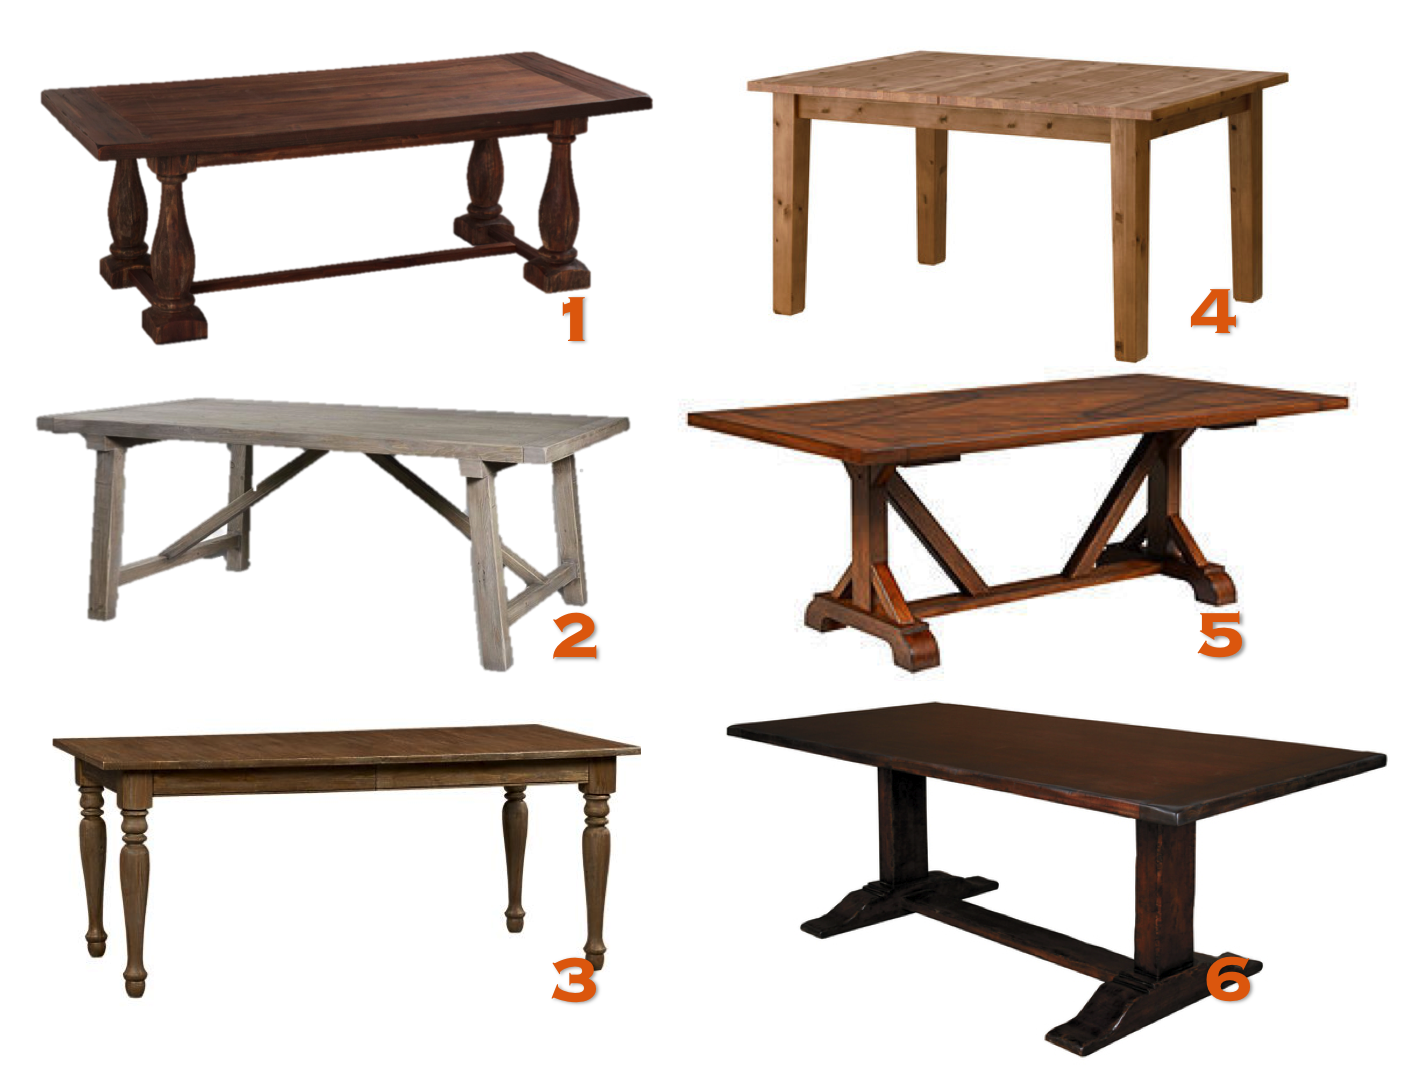 Rustic Farmhouse Tables Excellence at Home